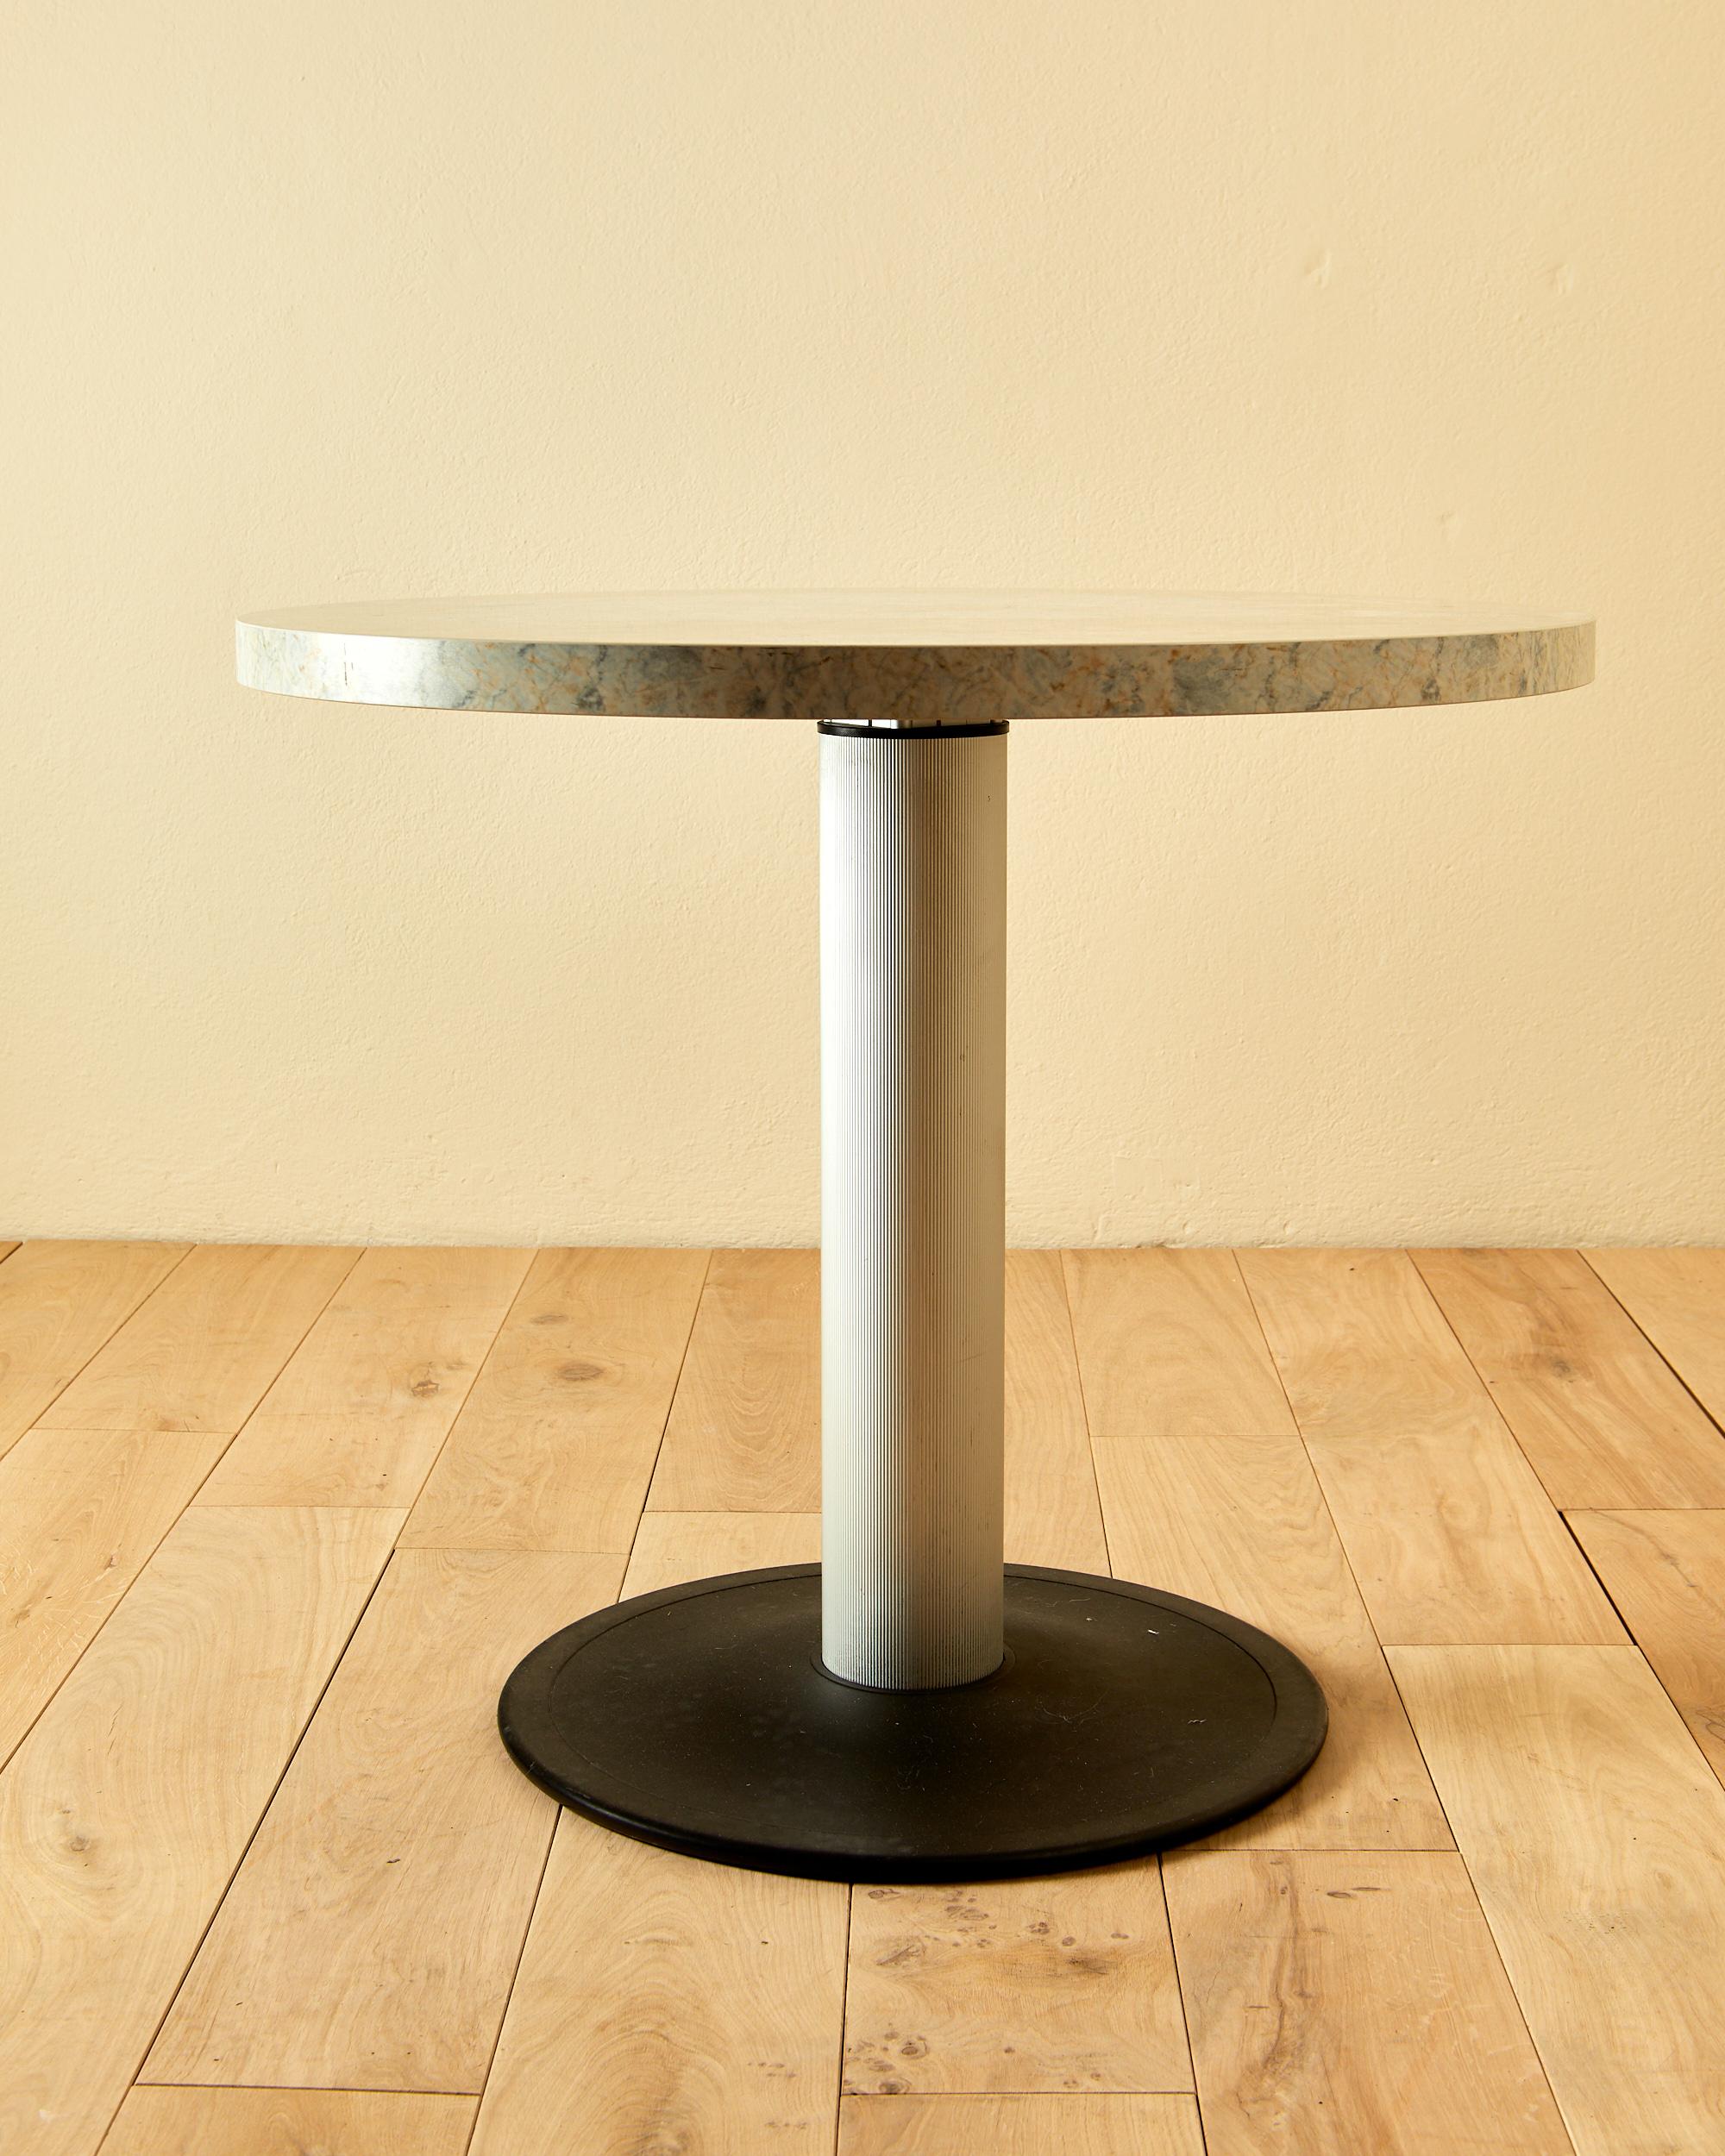 Memphis,
Pedestal table,
iron and aluminum base,
formica top in marble imitation,
circa 1980, Italy.
Height 74 cm, diameter 85 cm, depth of the top 4 cm.